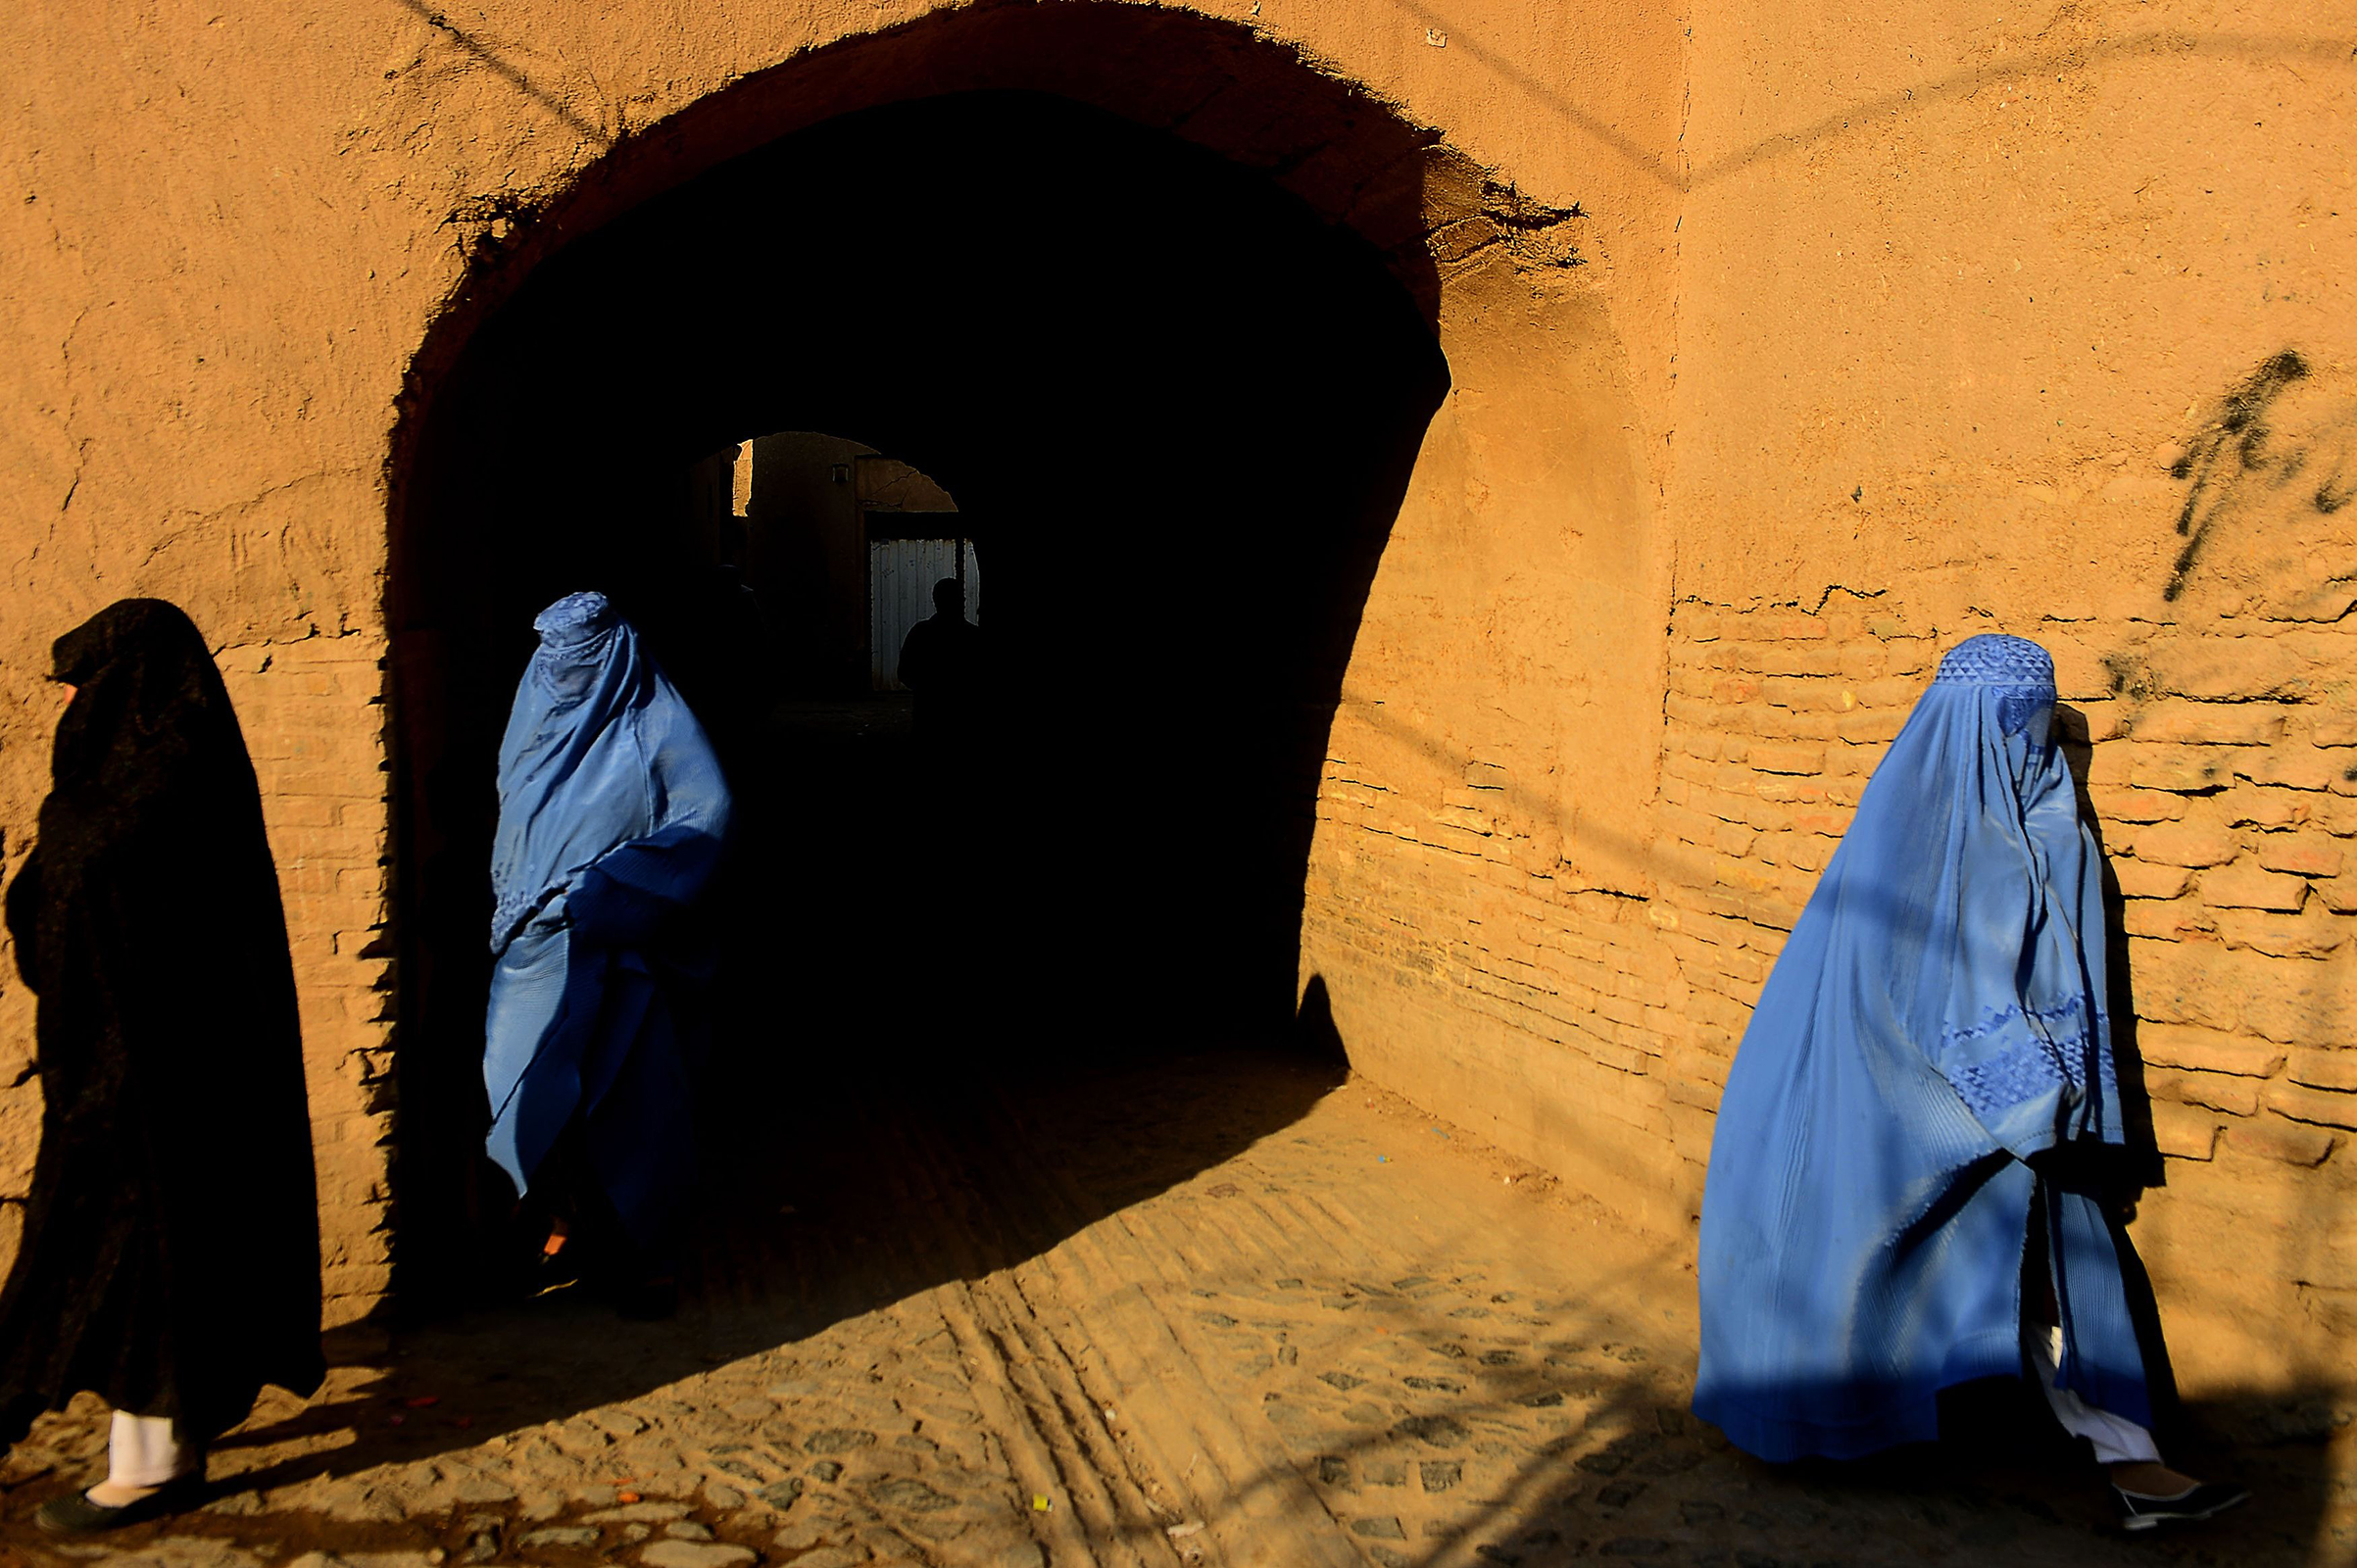 Women in the old section of Herat, Afghanistan, on Jan. 9, 2018 (Hoshang Hashimi—AFP/Getty Images)